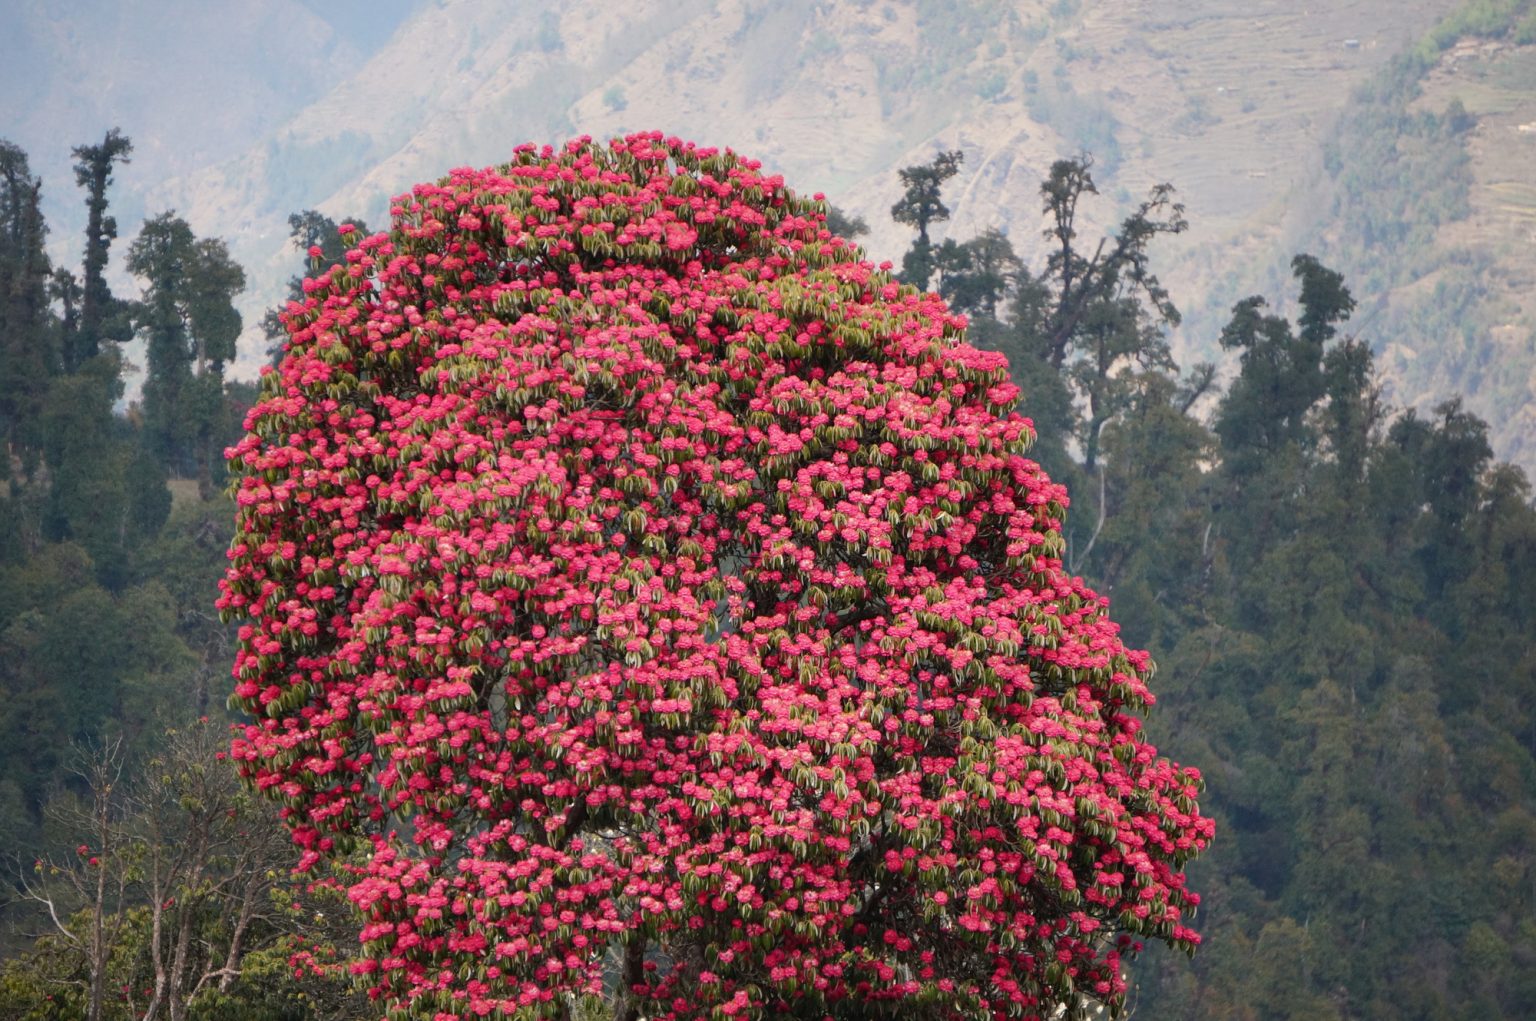 Rhododendron tree Nepal - By Mountain People